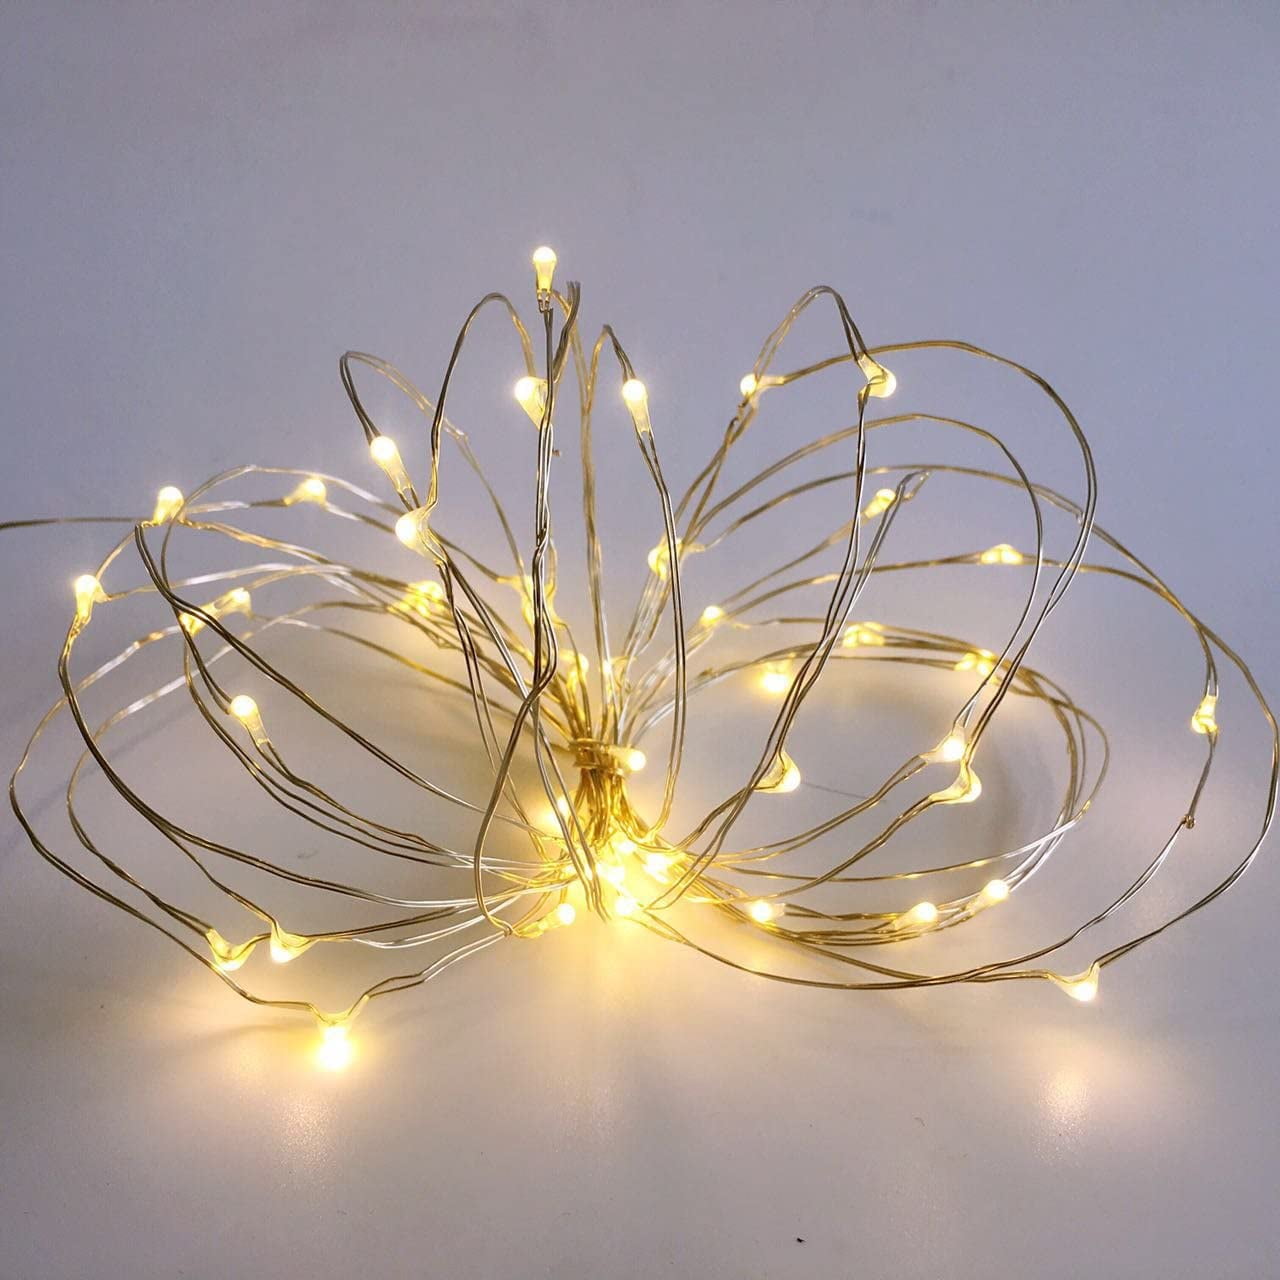 Warm White Tiny Lites Silver Wire Indoor and Outdoor LED Light String 9.8-Feet 